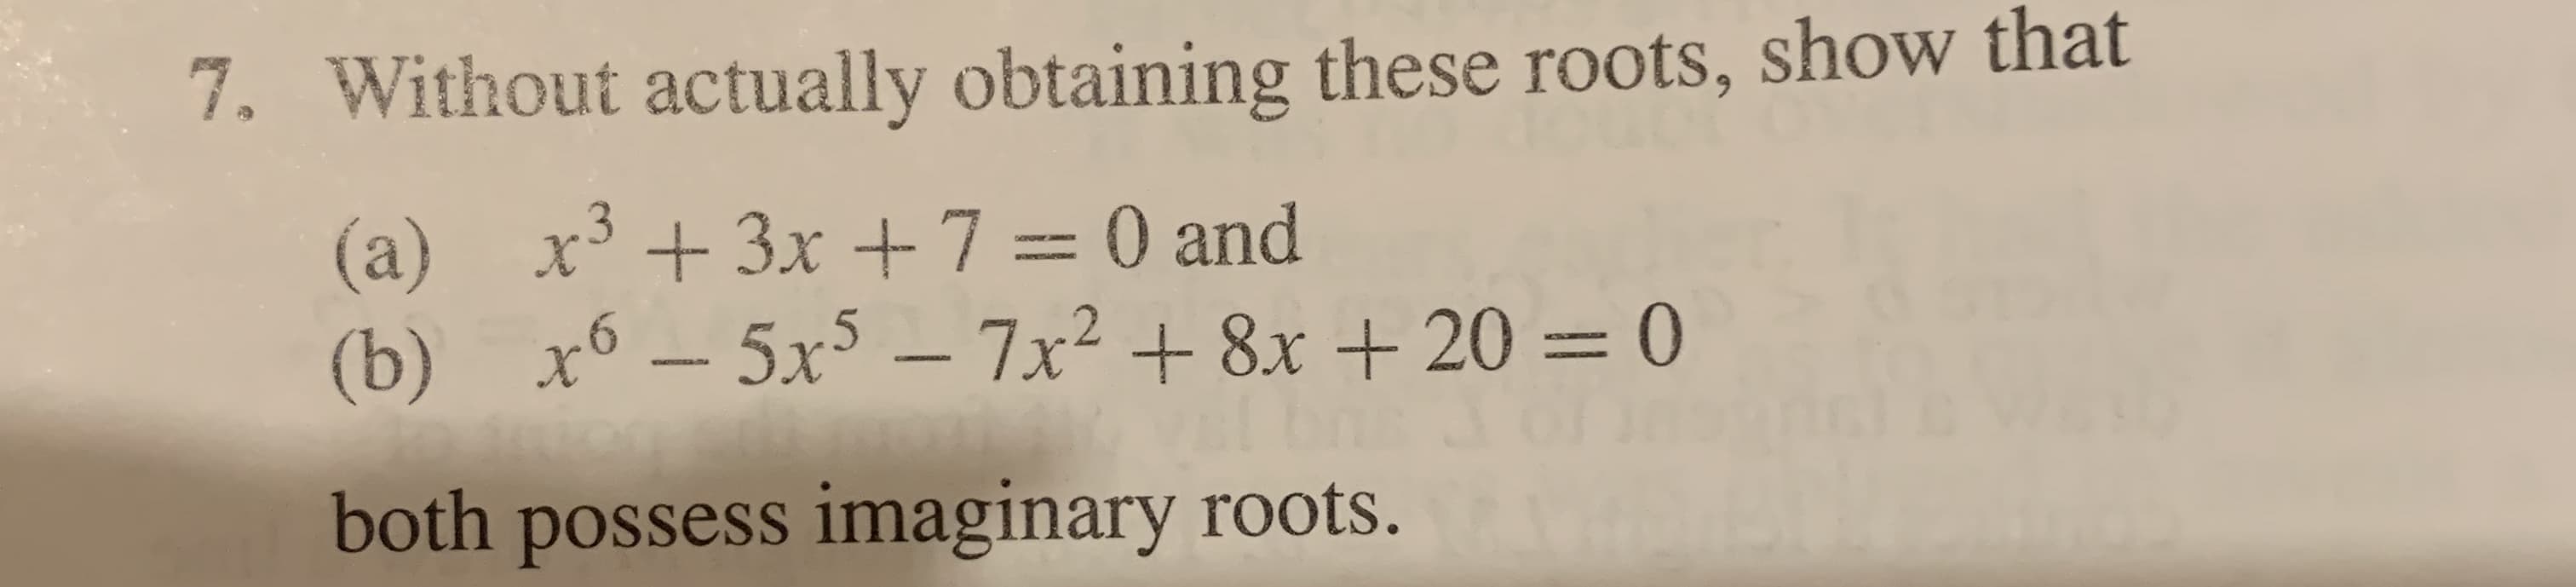 7. Without actually obtaining these roots, show that
+3x+7 = 0 and
(a)
x6-5x5- 7x2+8x+ 20
= 0
(b)
am
both possess imaginary roots
